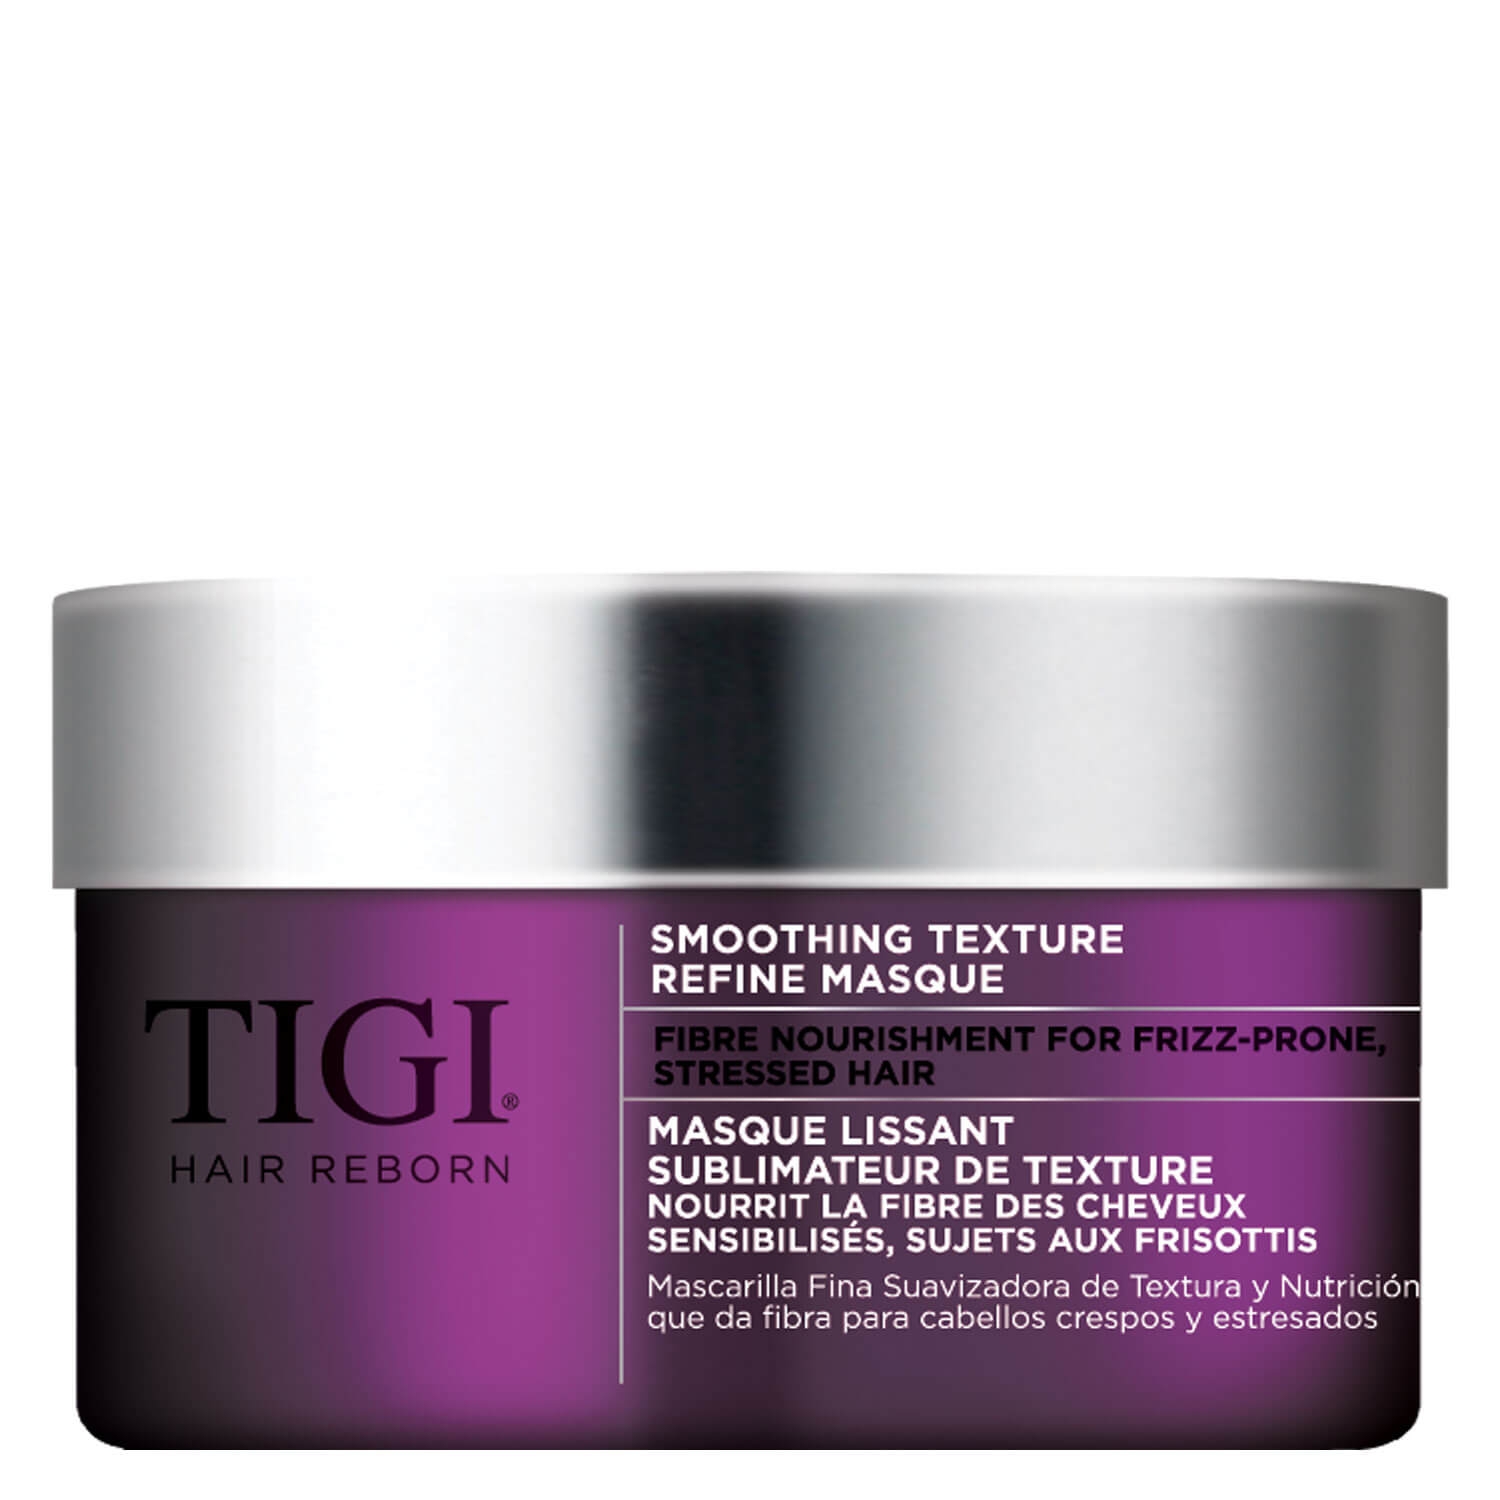 Product image from Hair Reborn Serenity - Smoothing Texture Refine Masque